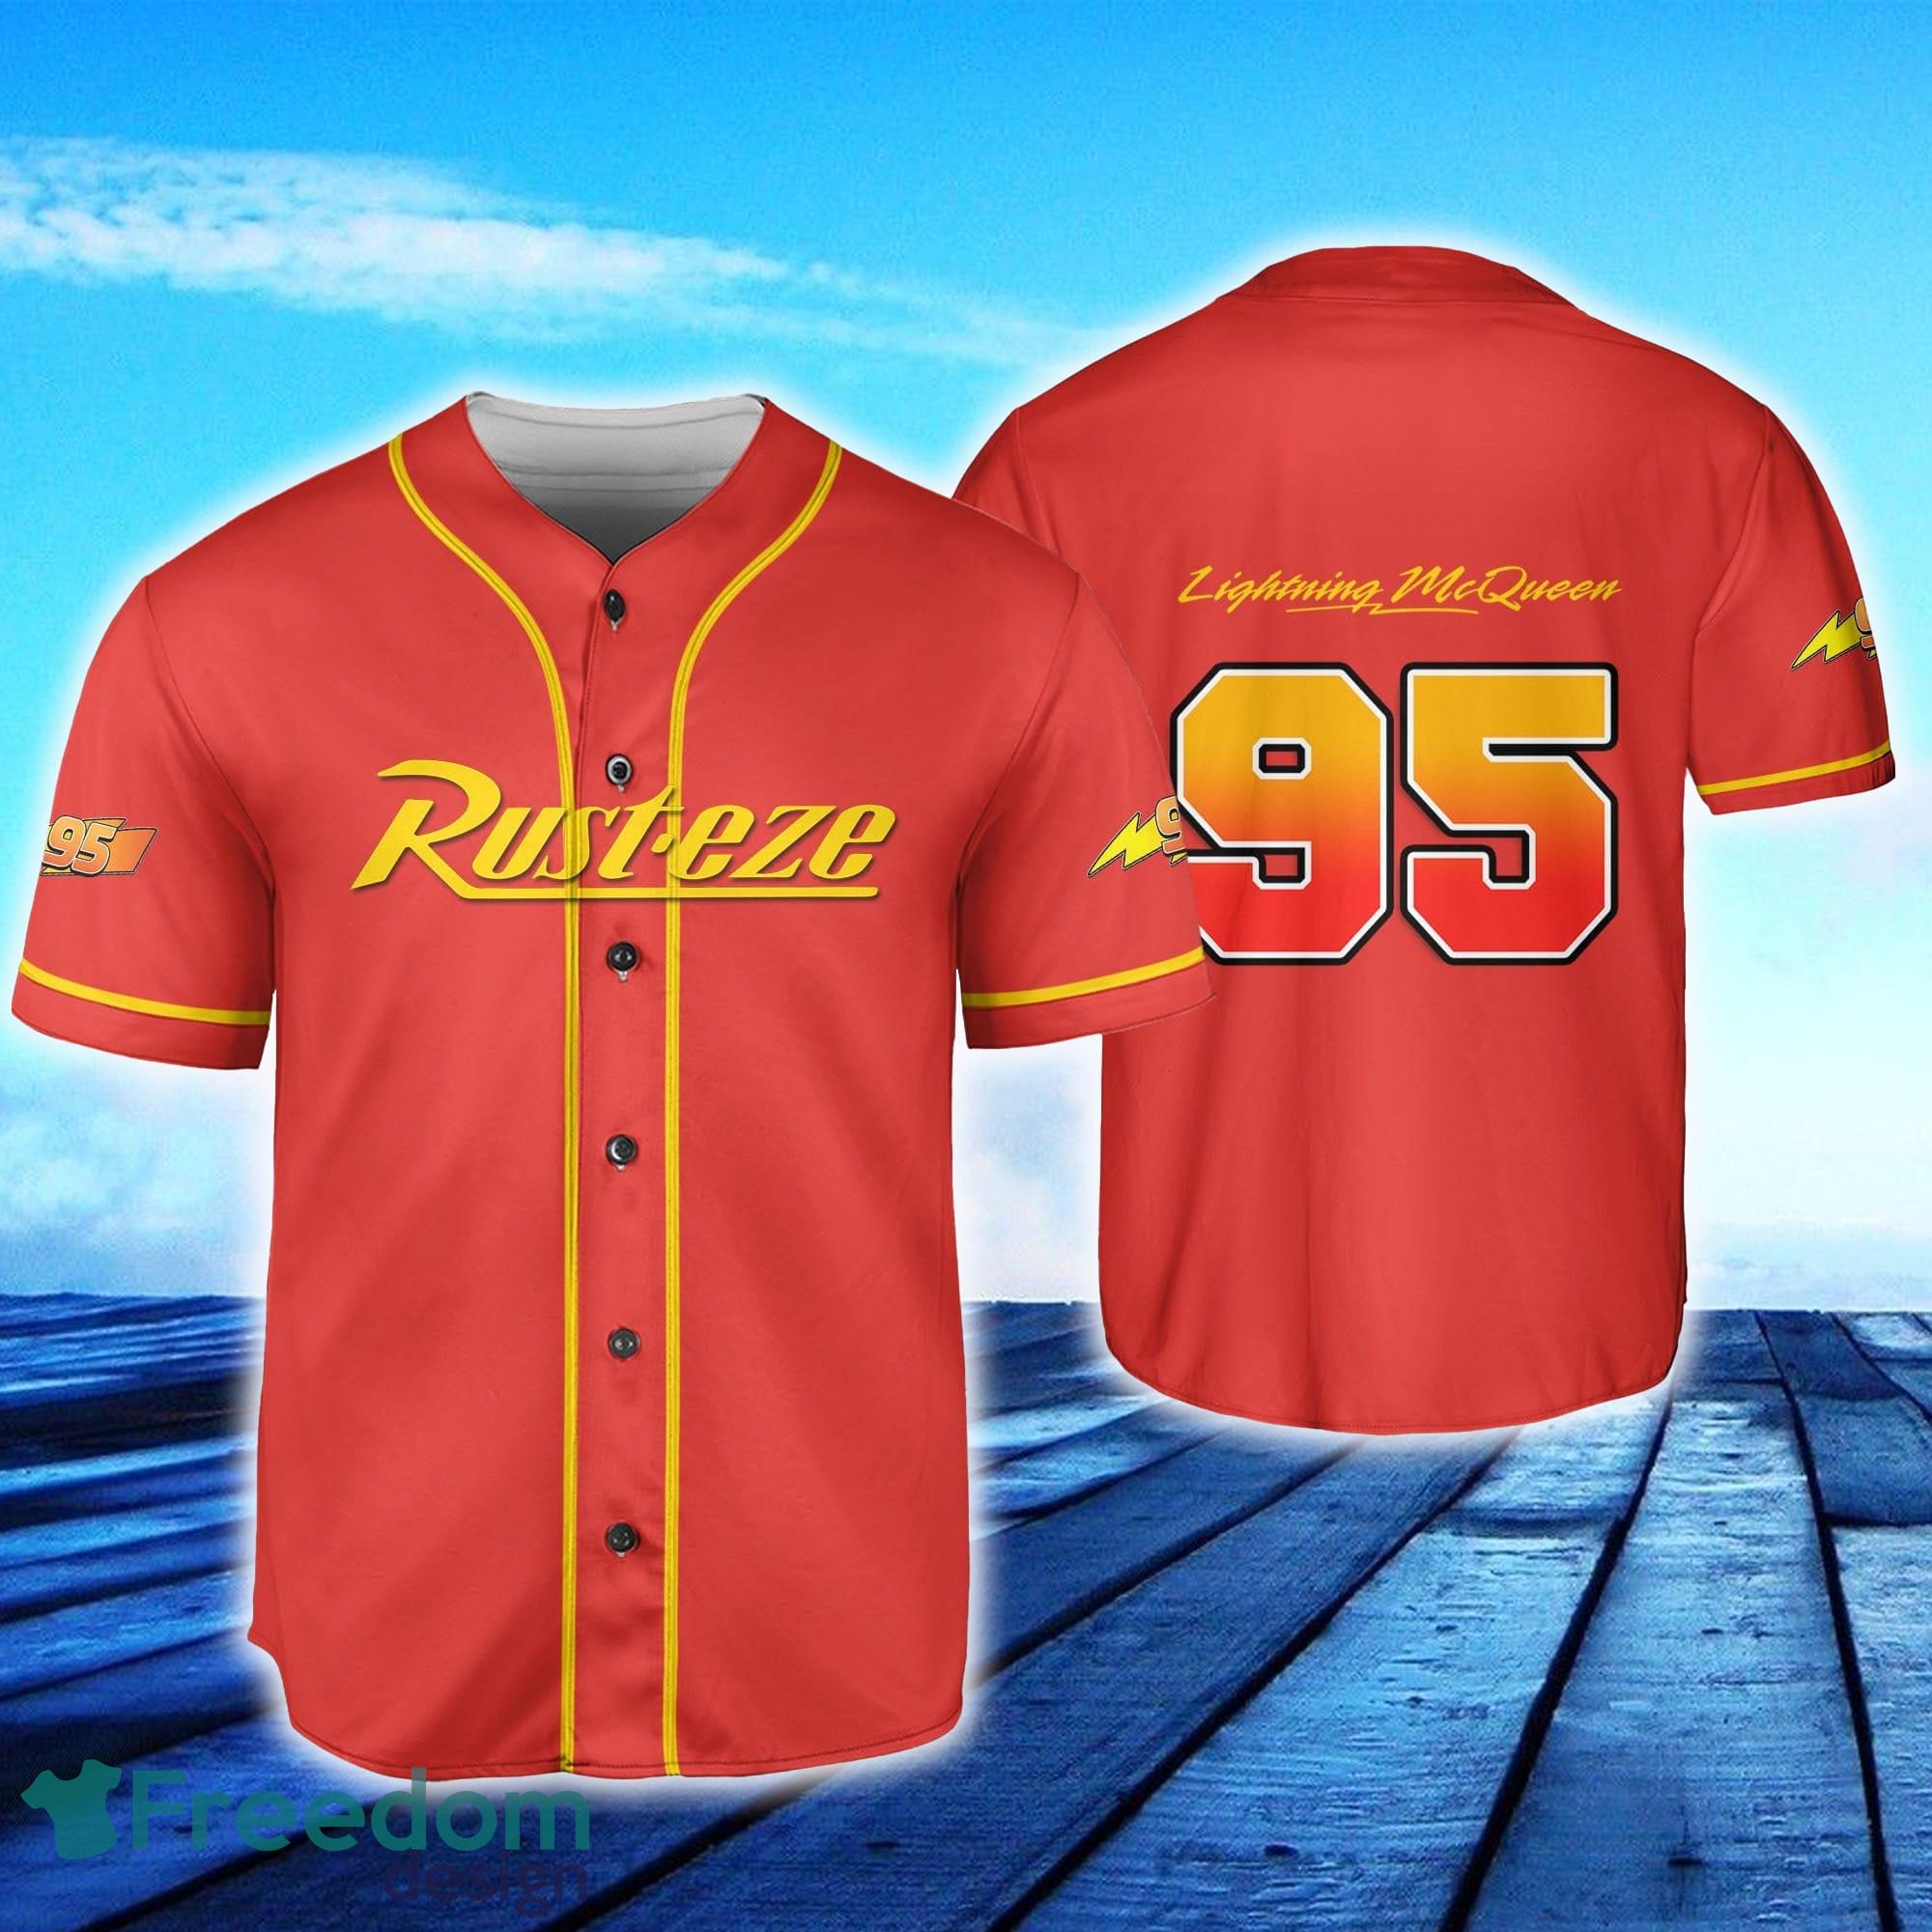 Custom Number And Name Mcqueen Red Baseball Jersey Disney Men And Women  Gift For Fans - Freedomdesign